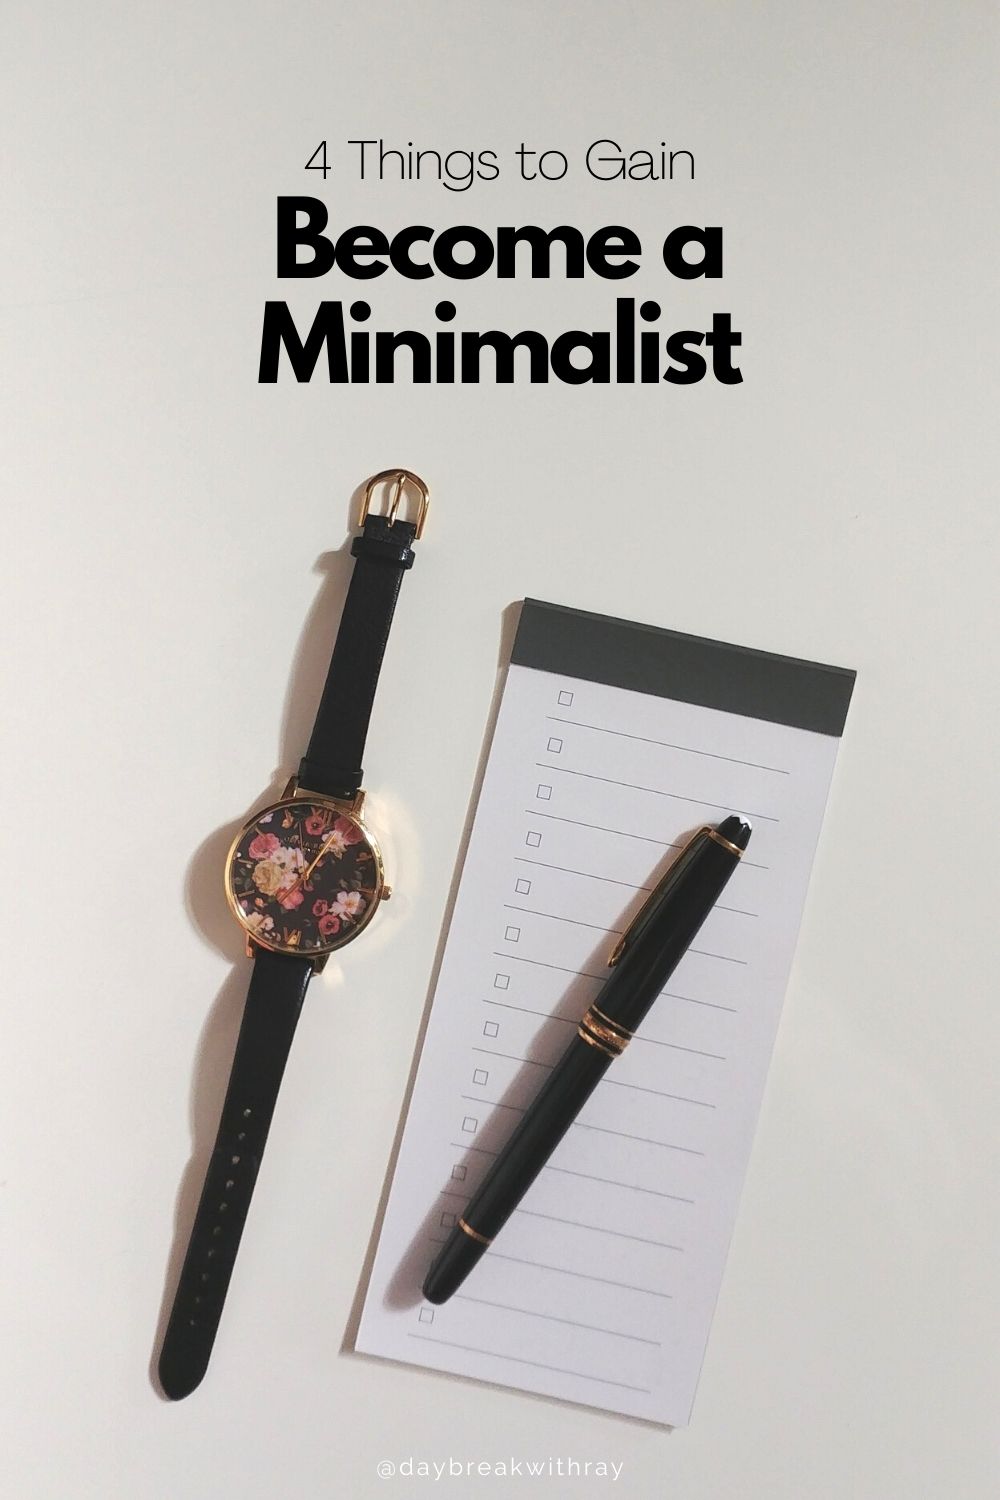 Gain More of These 4 Things as a Minimalist